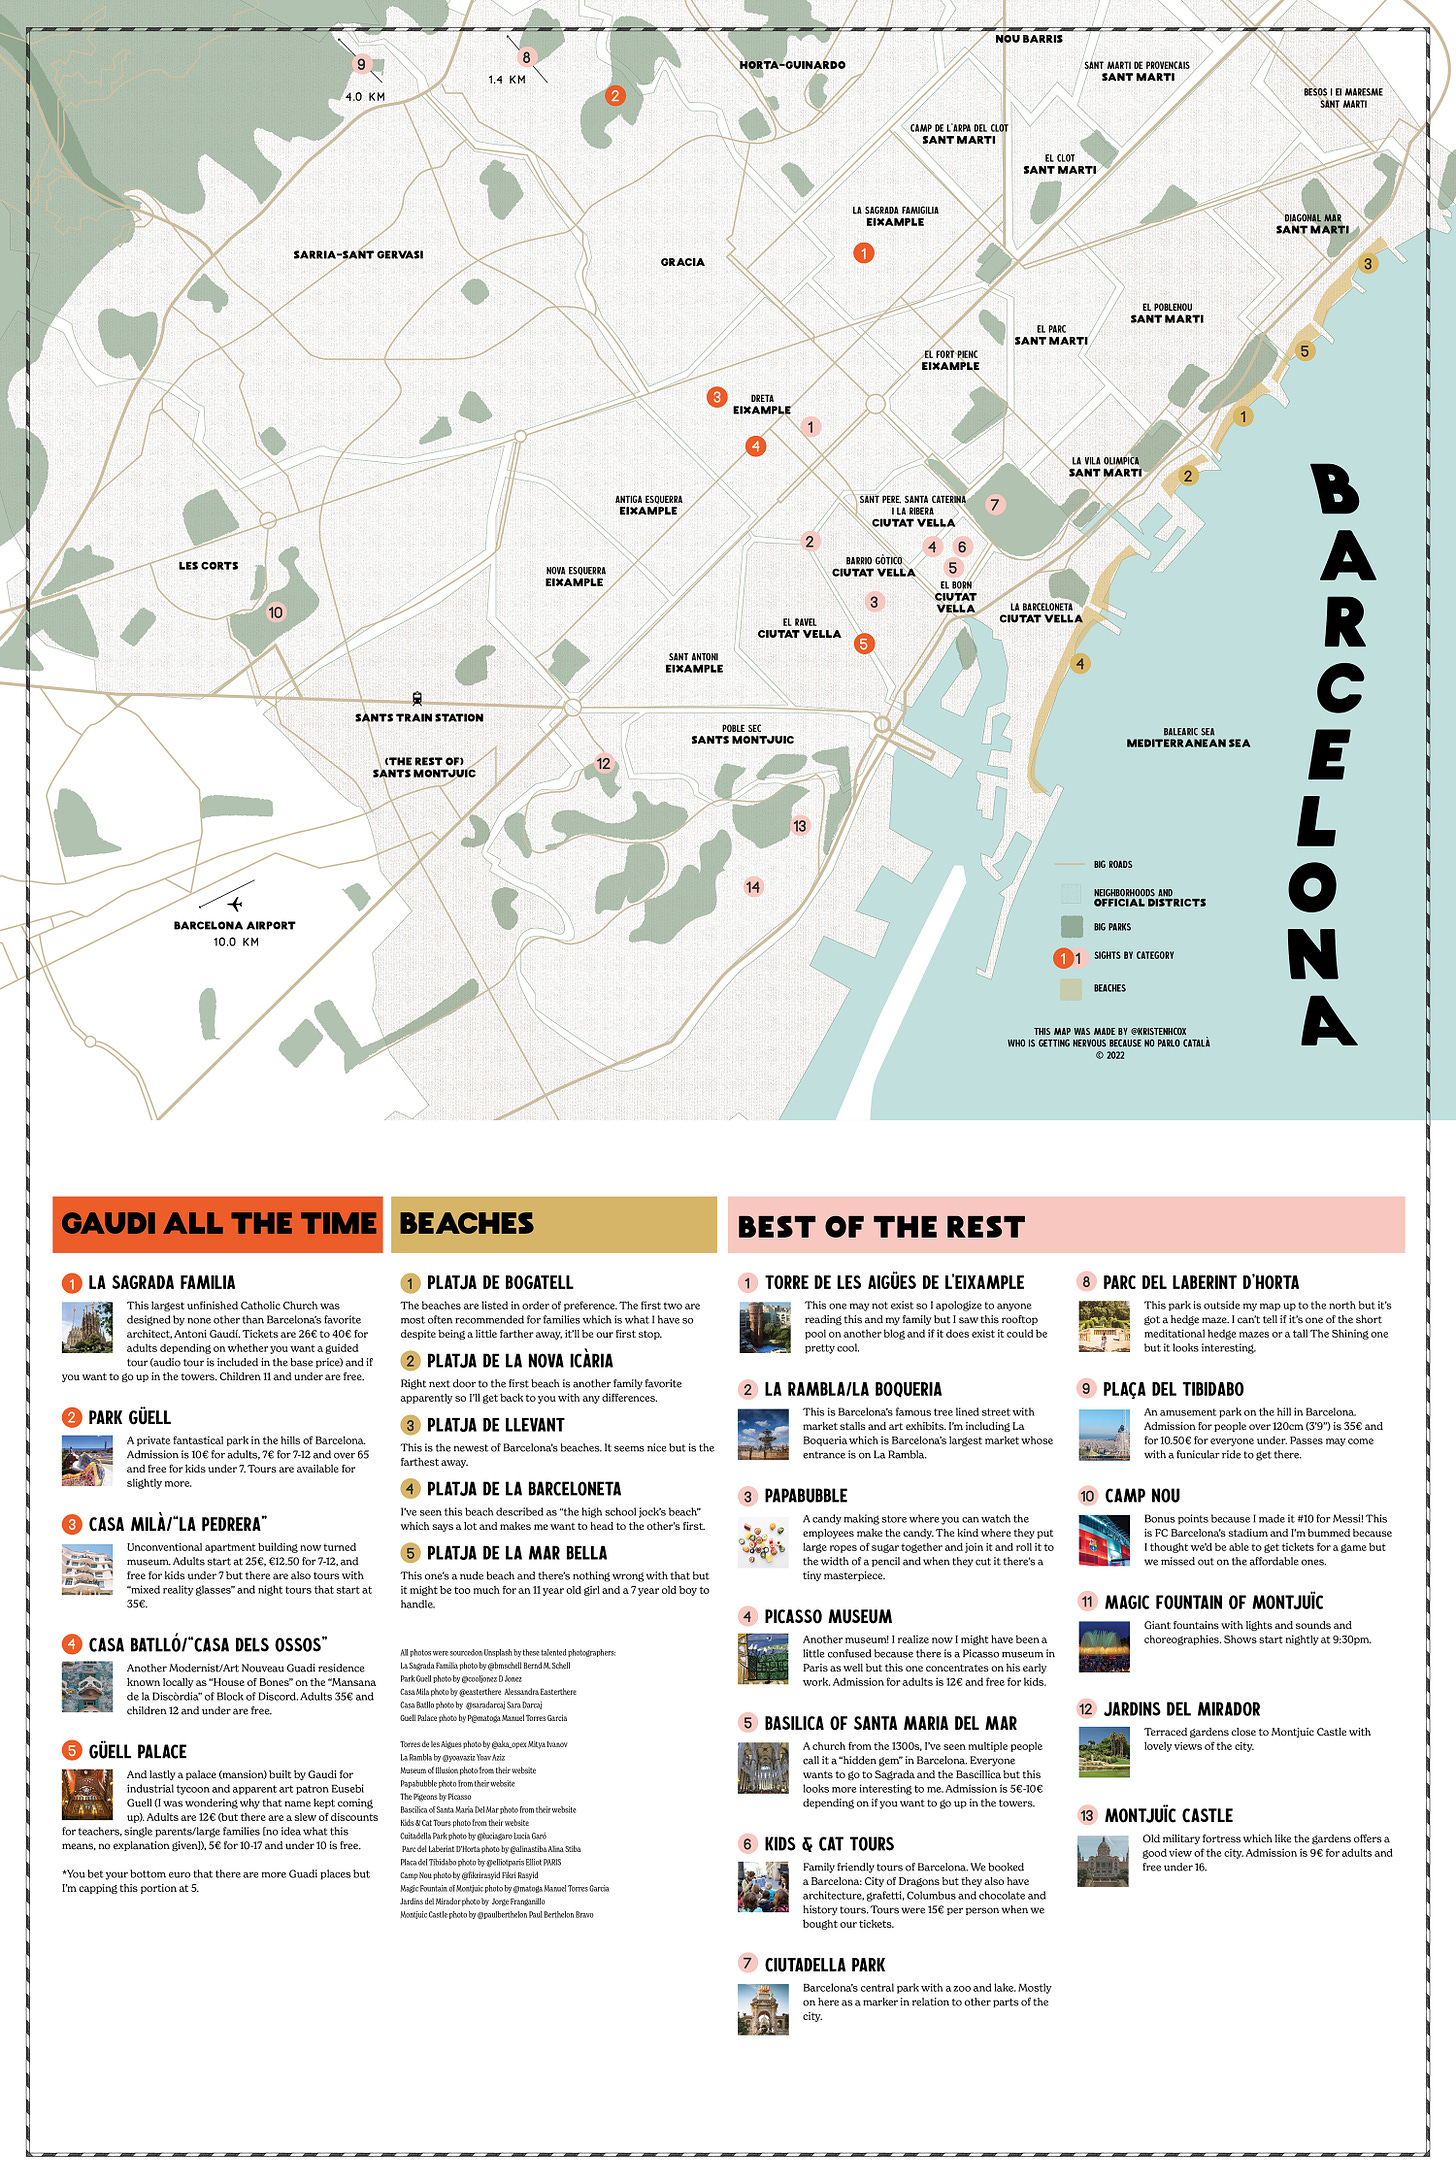 map of Barcelona with major attractions, Gaudi and other, as well as beaches and neighborhoods.